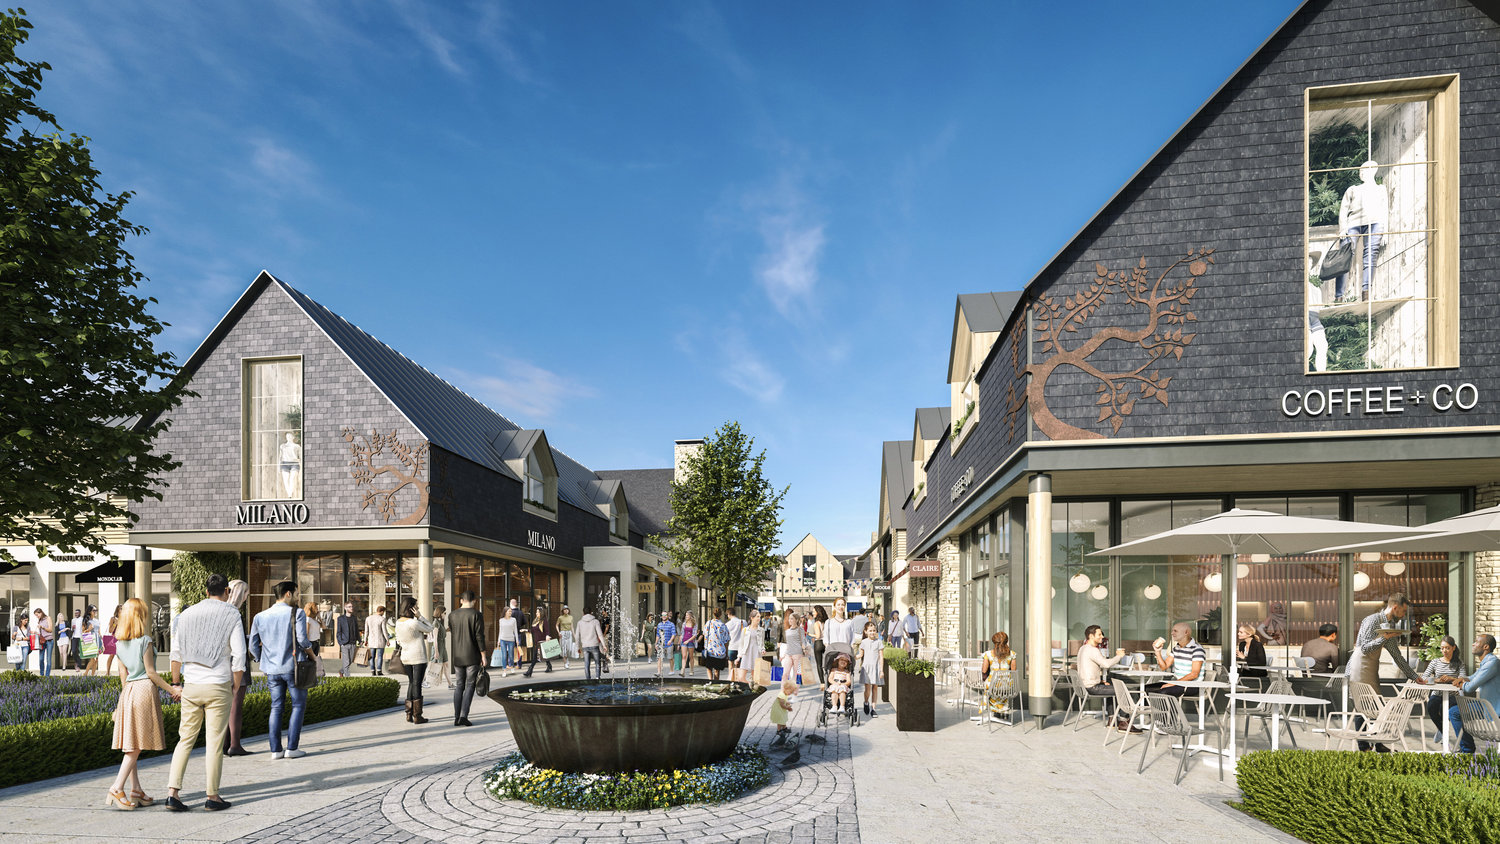 NEWS | Construction work continuing at Cotswold Designer Outlet near the M5 with Hereford shoppers targeted